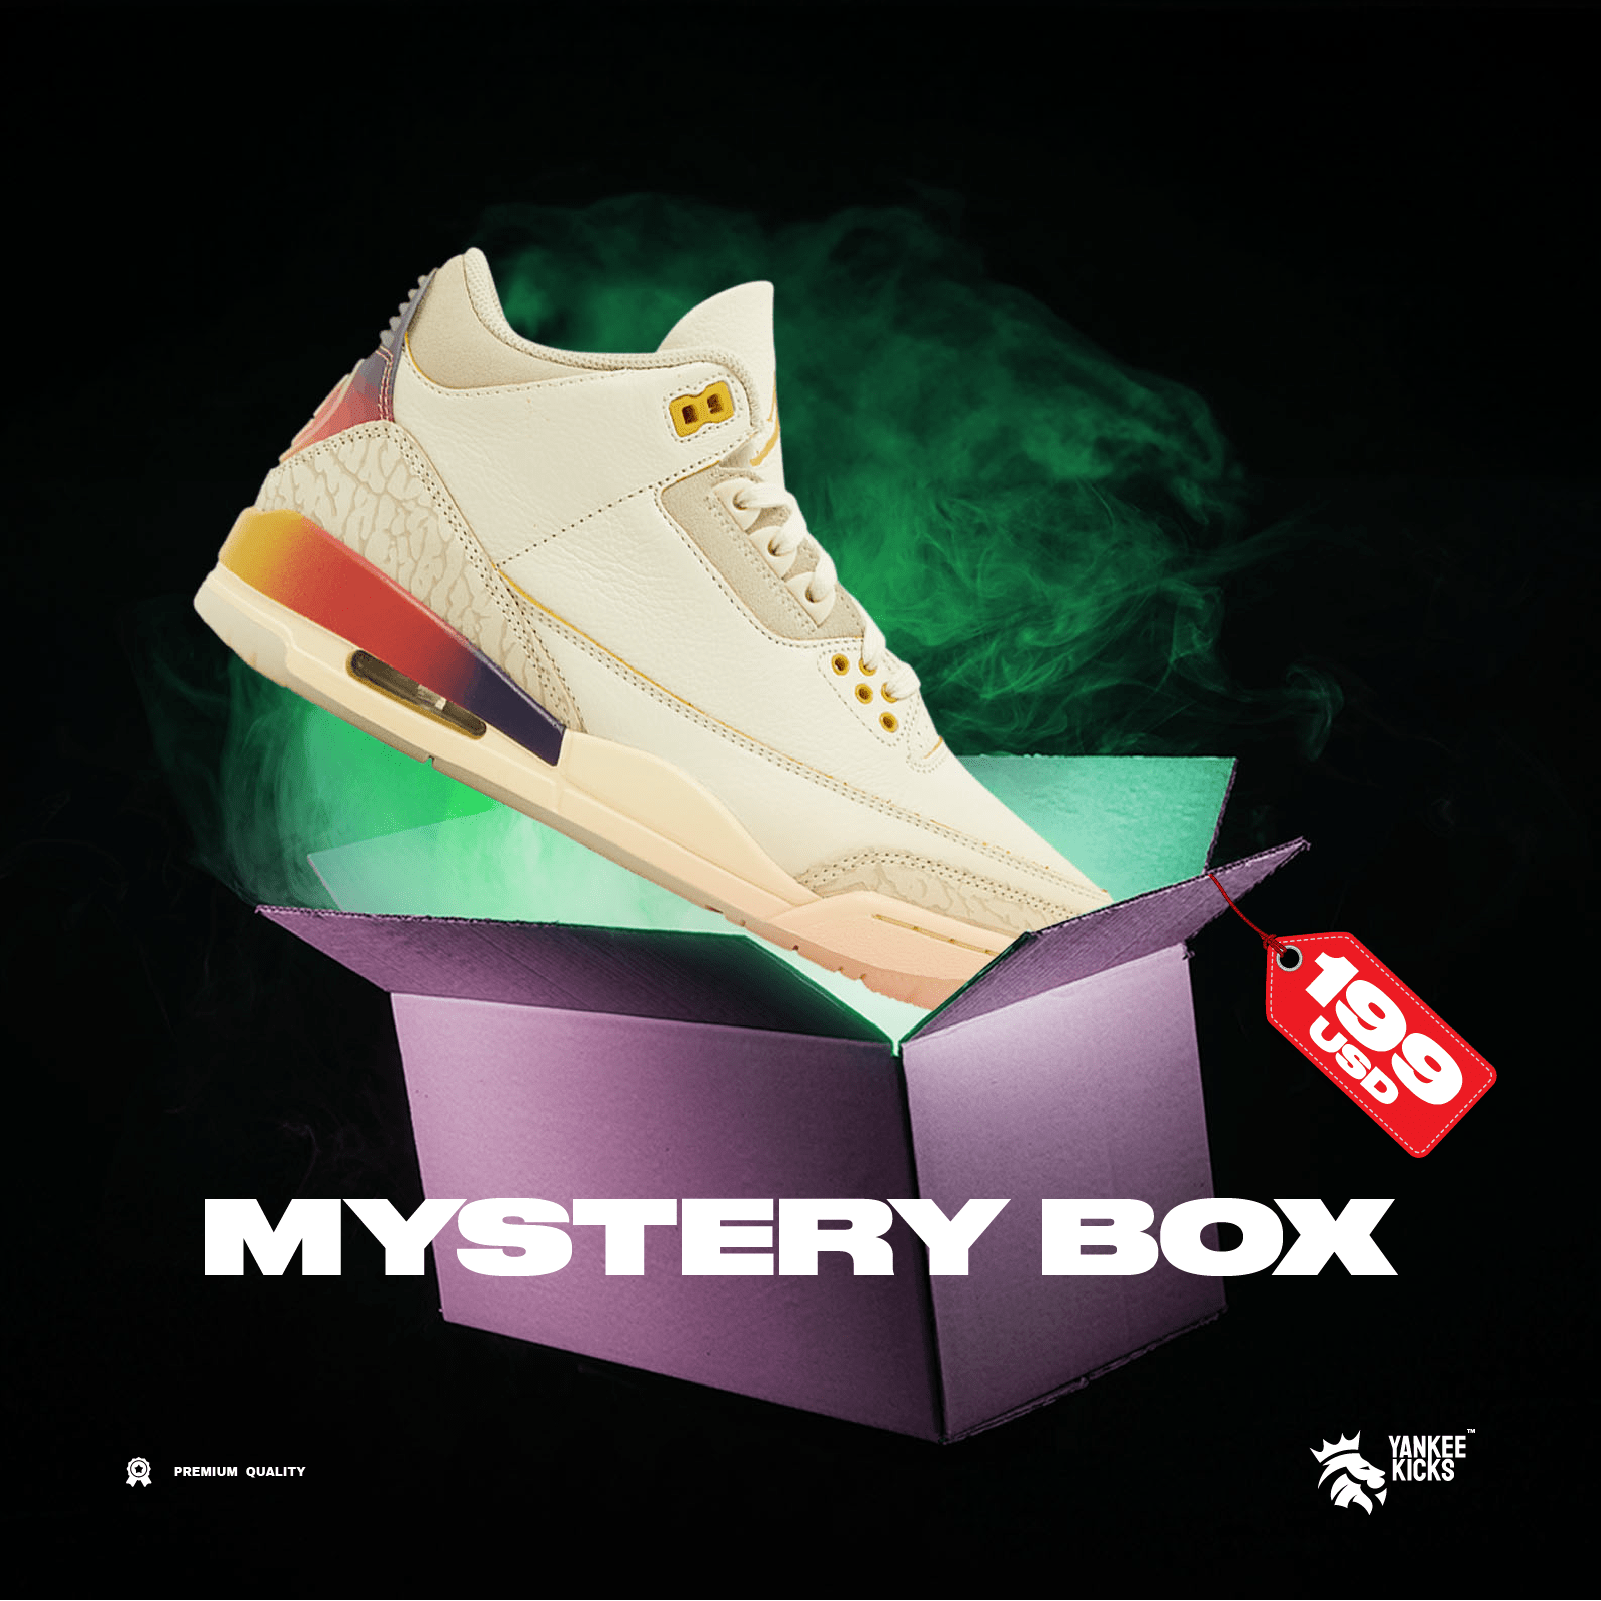 Father's Day Sneaker Mystery Box